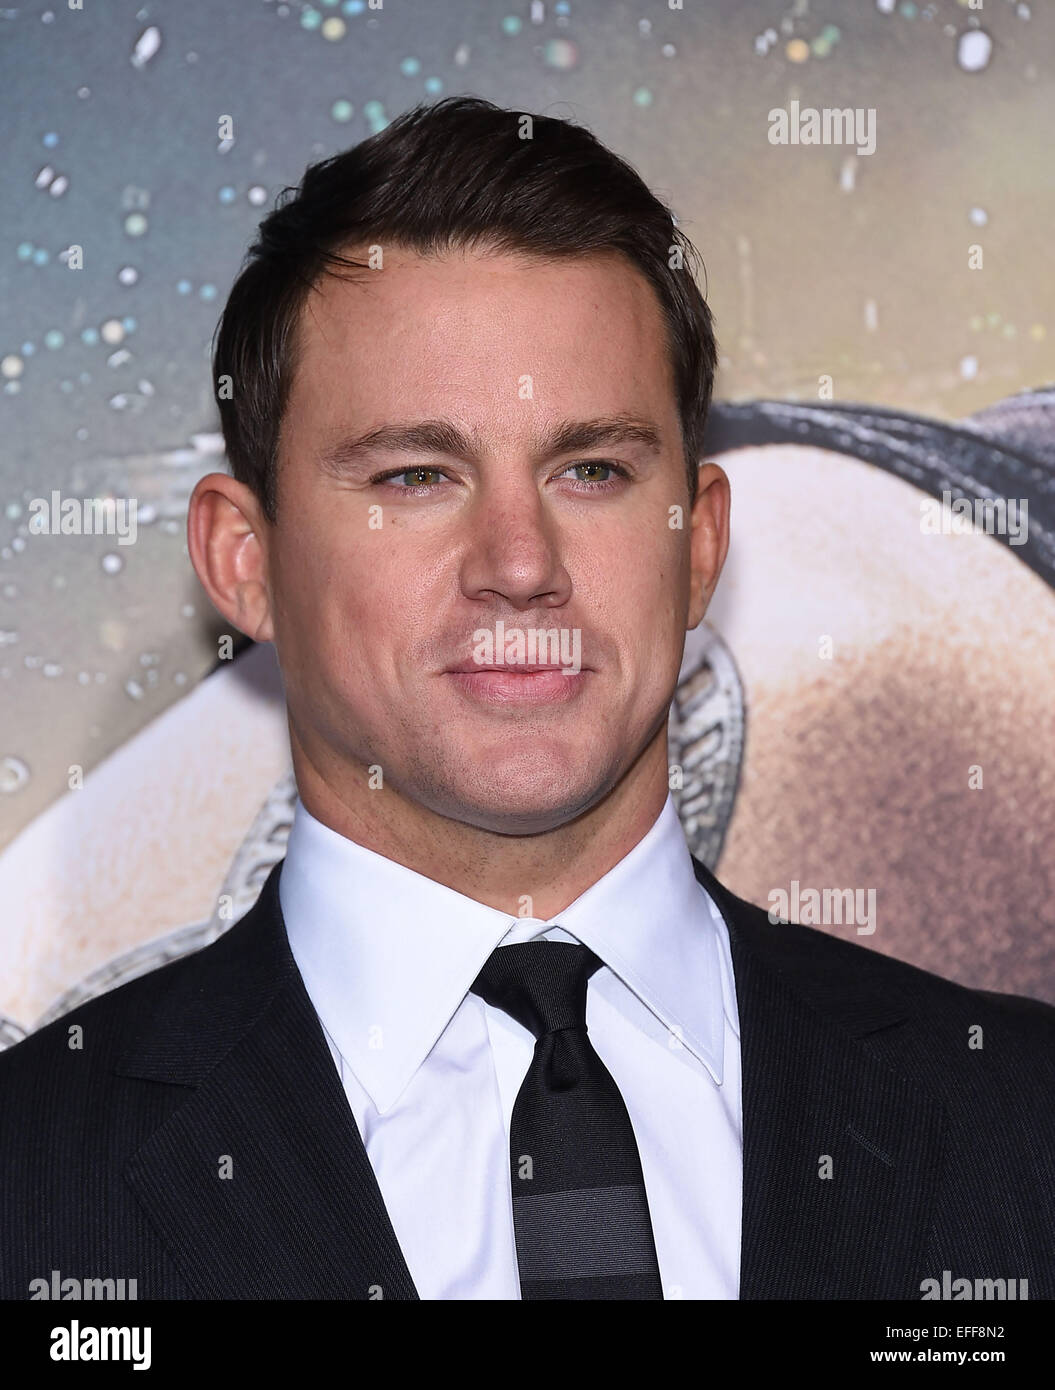 Hollywood, California, USA. 2nd Feb, 2015. Channing Tatum arrives for the premiere of the film 'Jupiter Ascending' at the Chinese theater. Credit:  Lisa O'Connor/ZUMA Wire/Alamy Live News Stock Photo